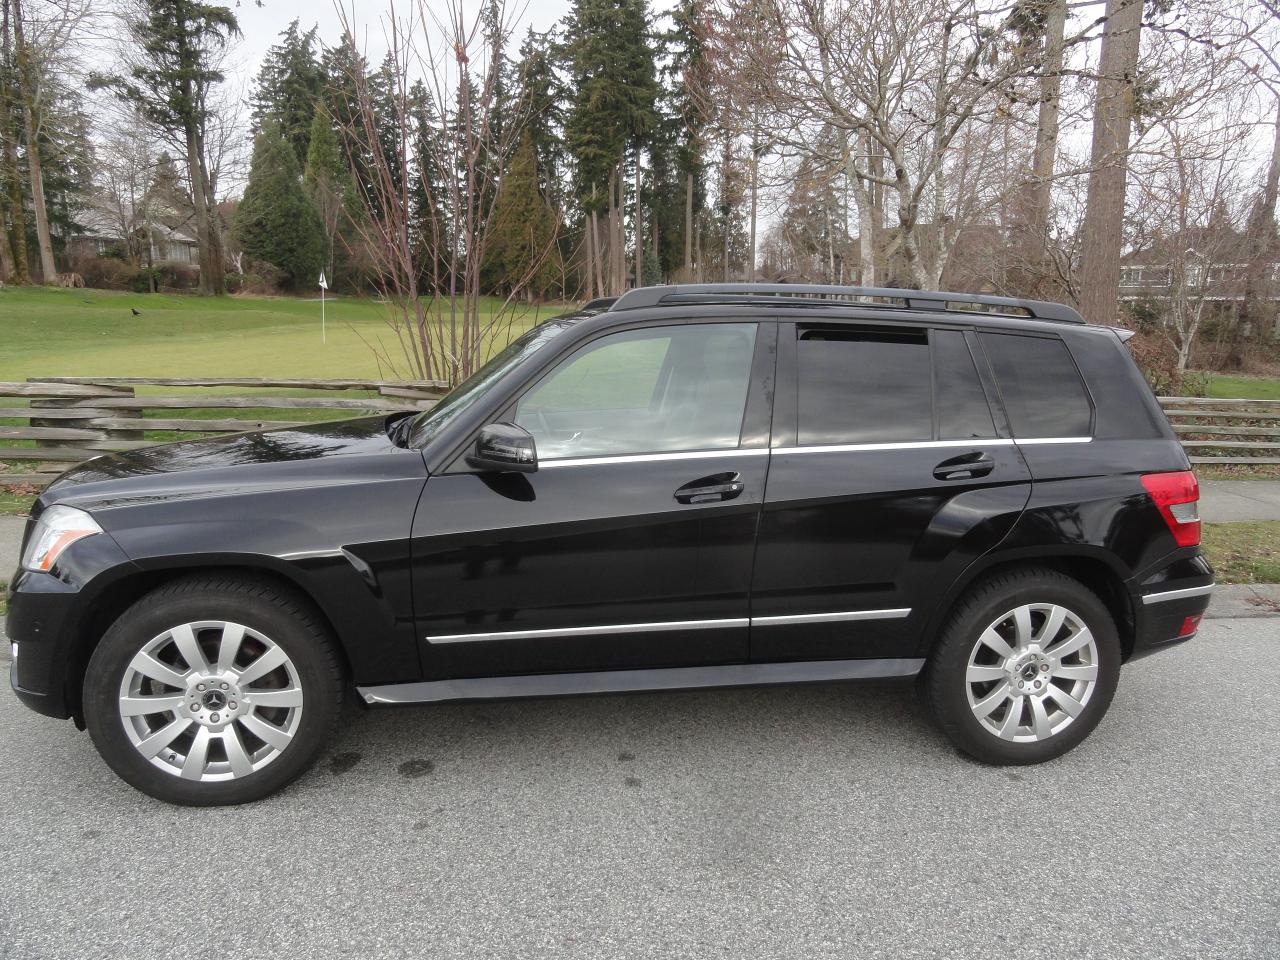 2010 Mercedes-Benz GLK350 4 MATIC -  DOC FEE ONLY $195.00 - Photo #2